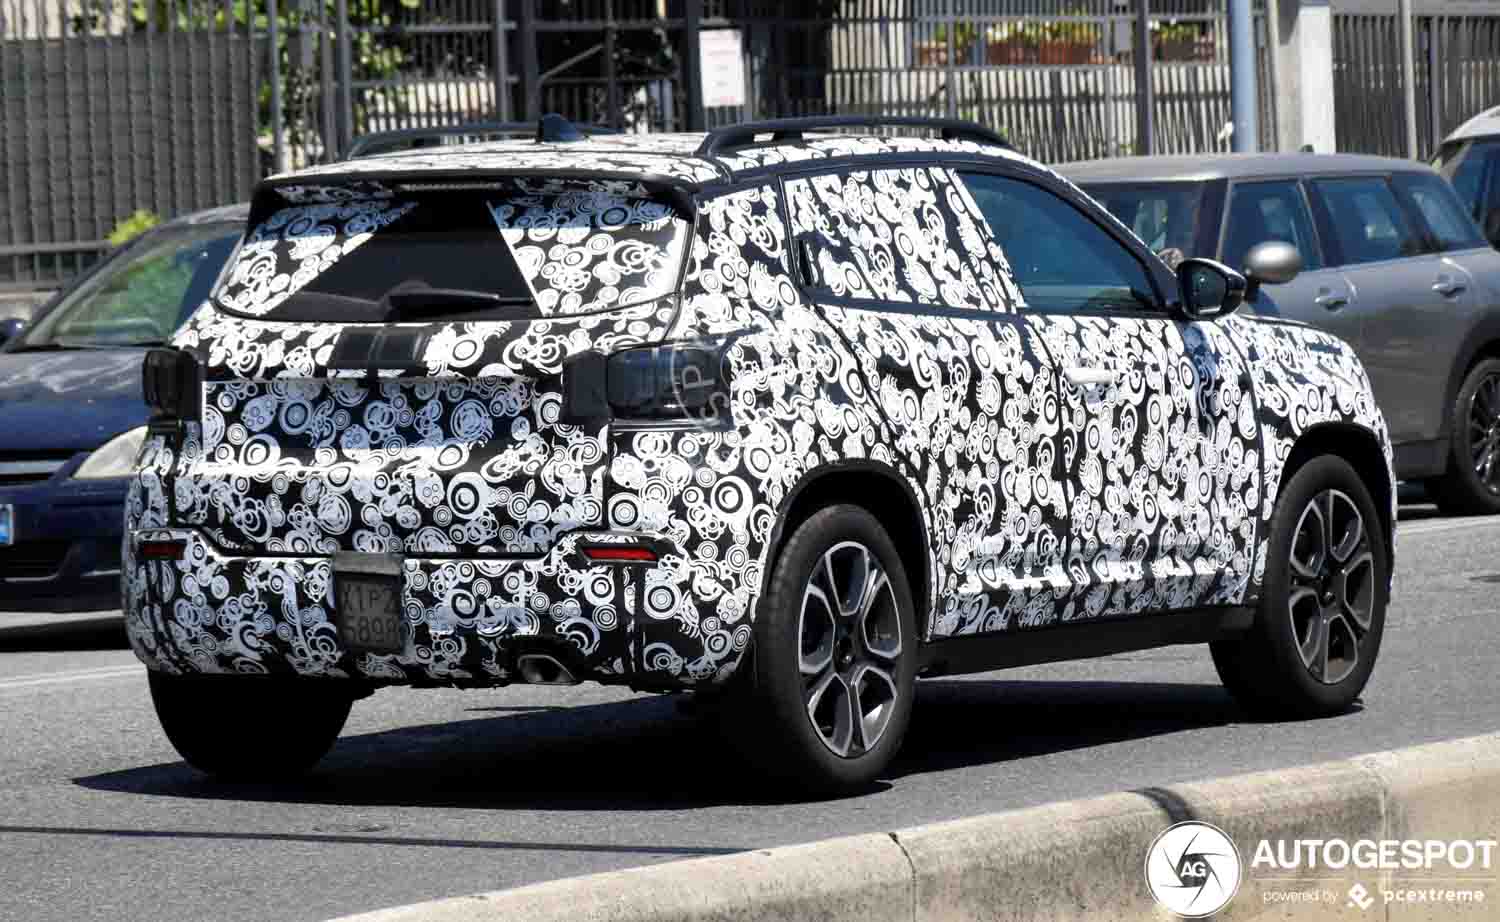 2023 Jeepster Compact SUV Spy Shots Out - Here Is What To Expect